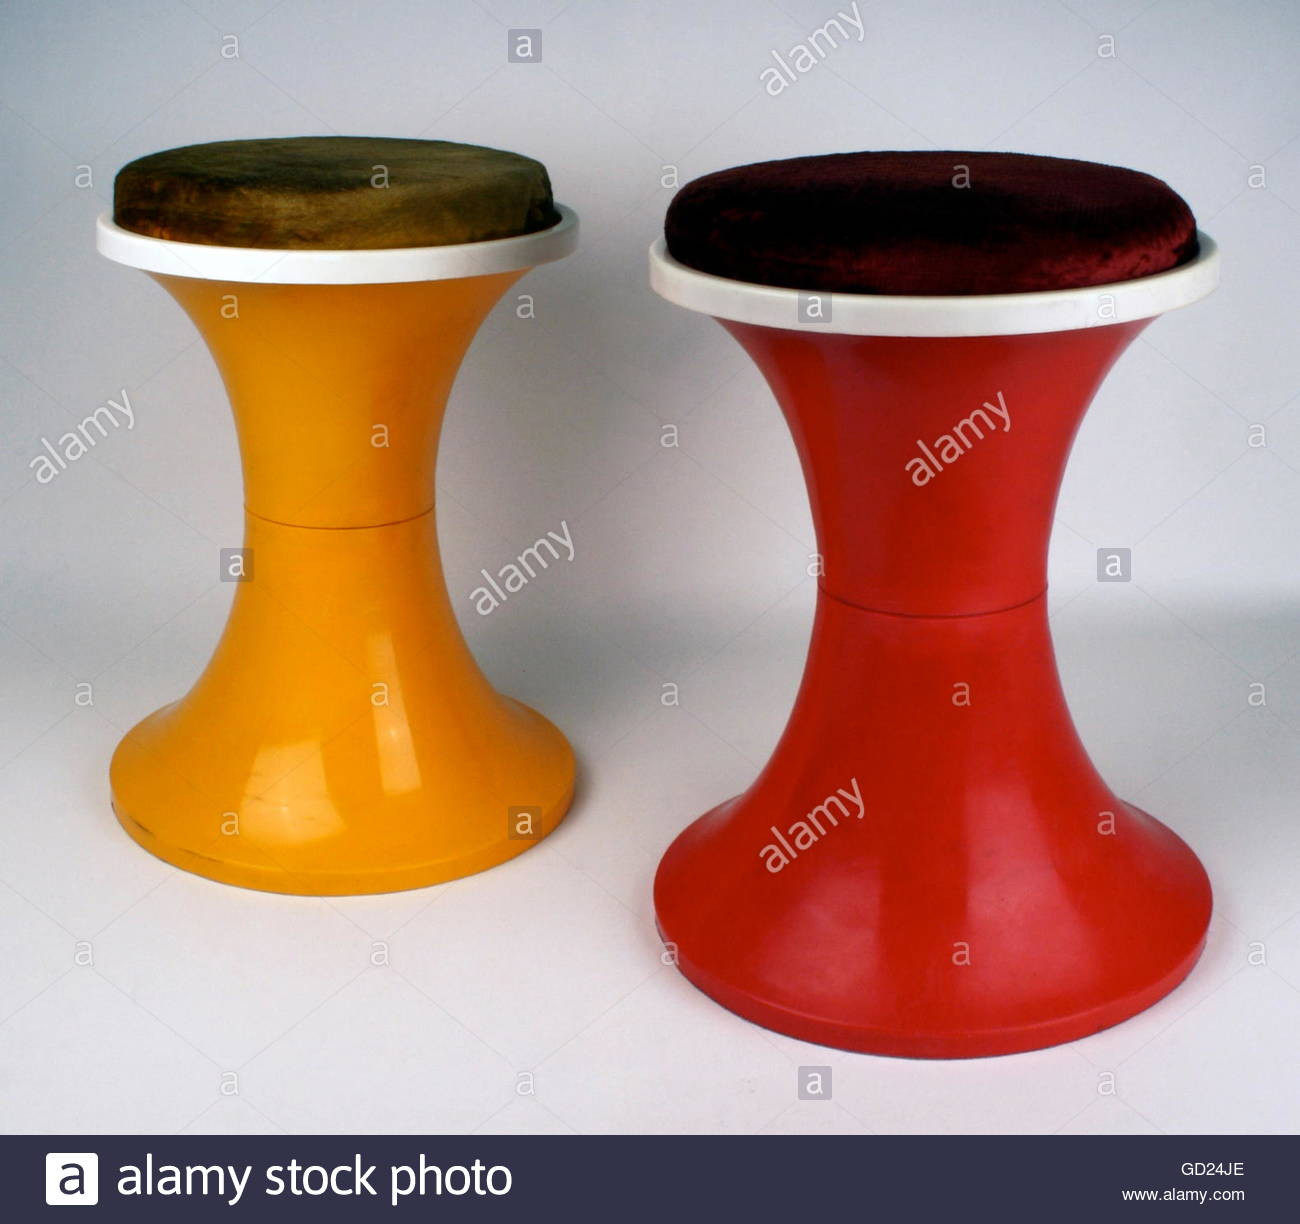 14 Stunning Plastic Cemetery Vase Liners 2024 free download plastic cemetery vase liners of 1970s furniture stock photos 1970s furniture stock images alamy for furniture seating furniture pluggable plastic stool annette for bath and terrace